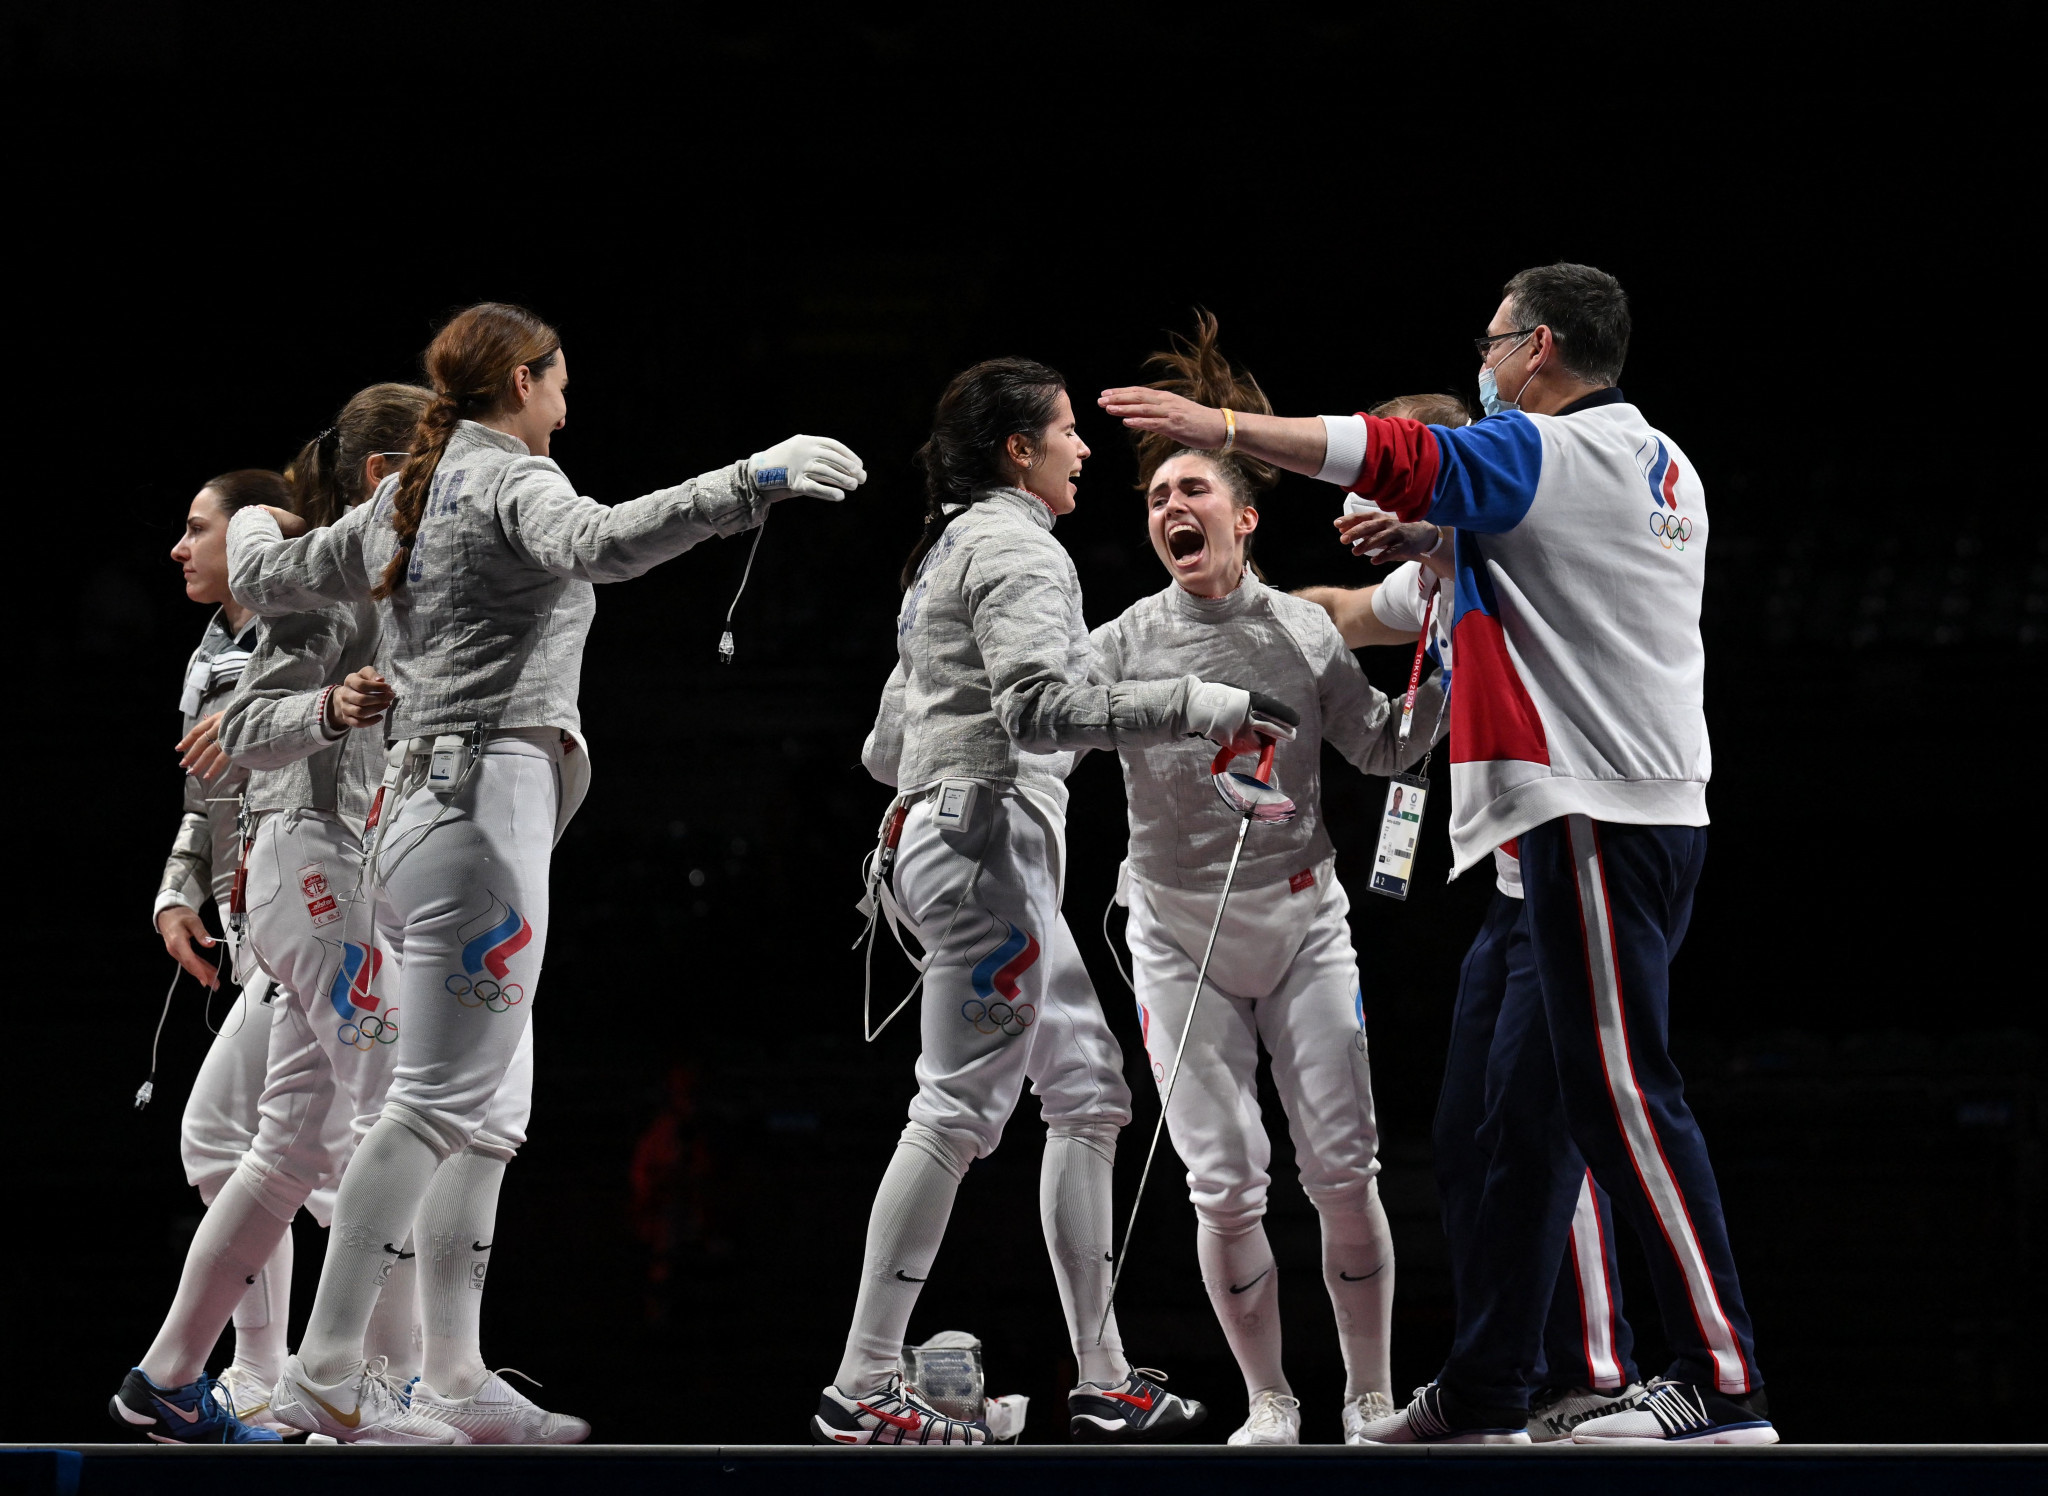 The Nordic Fencing Union has claimed that the decision to readmit Russian and Belarusian fencers has resulted in 